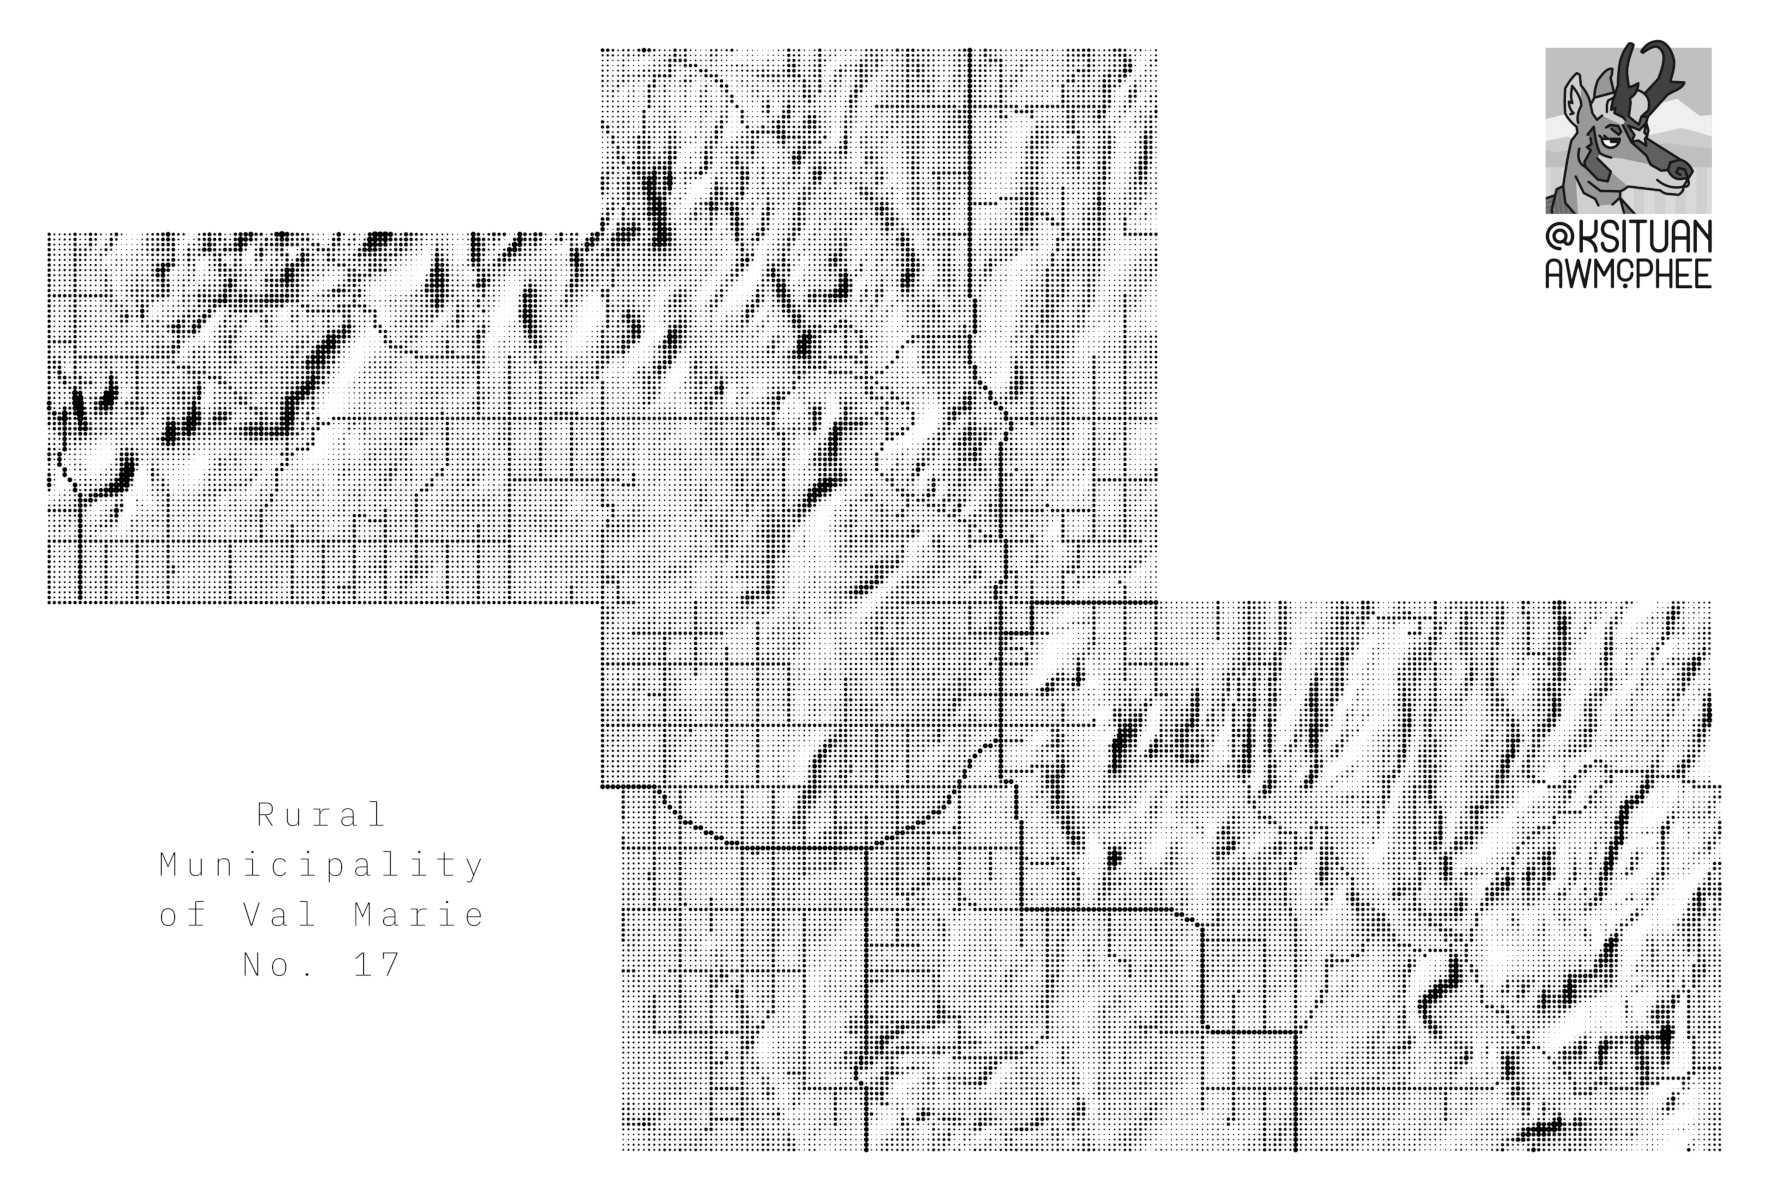 A dot-matrix style map of Val Marie and its surroundings.